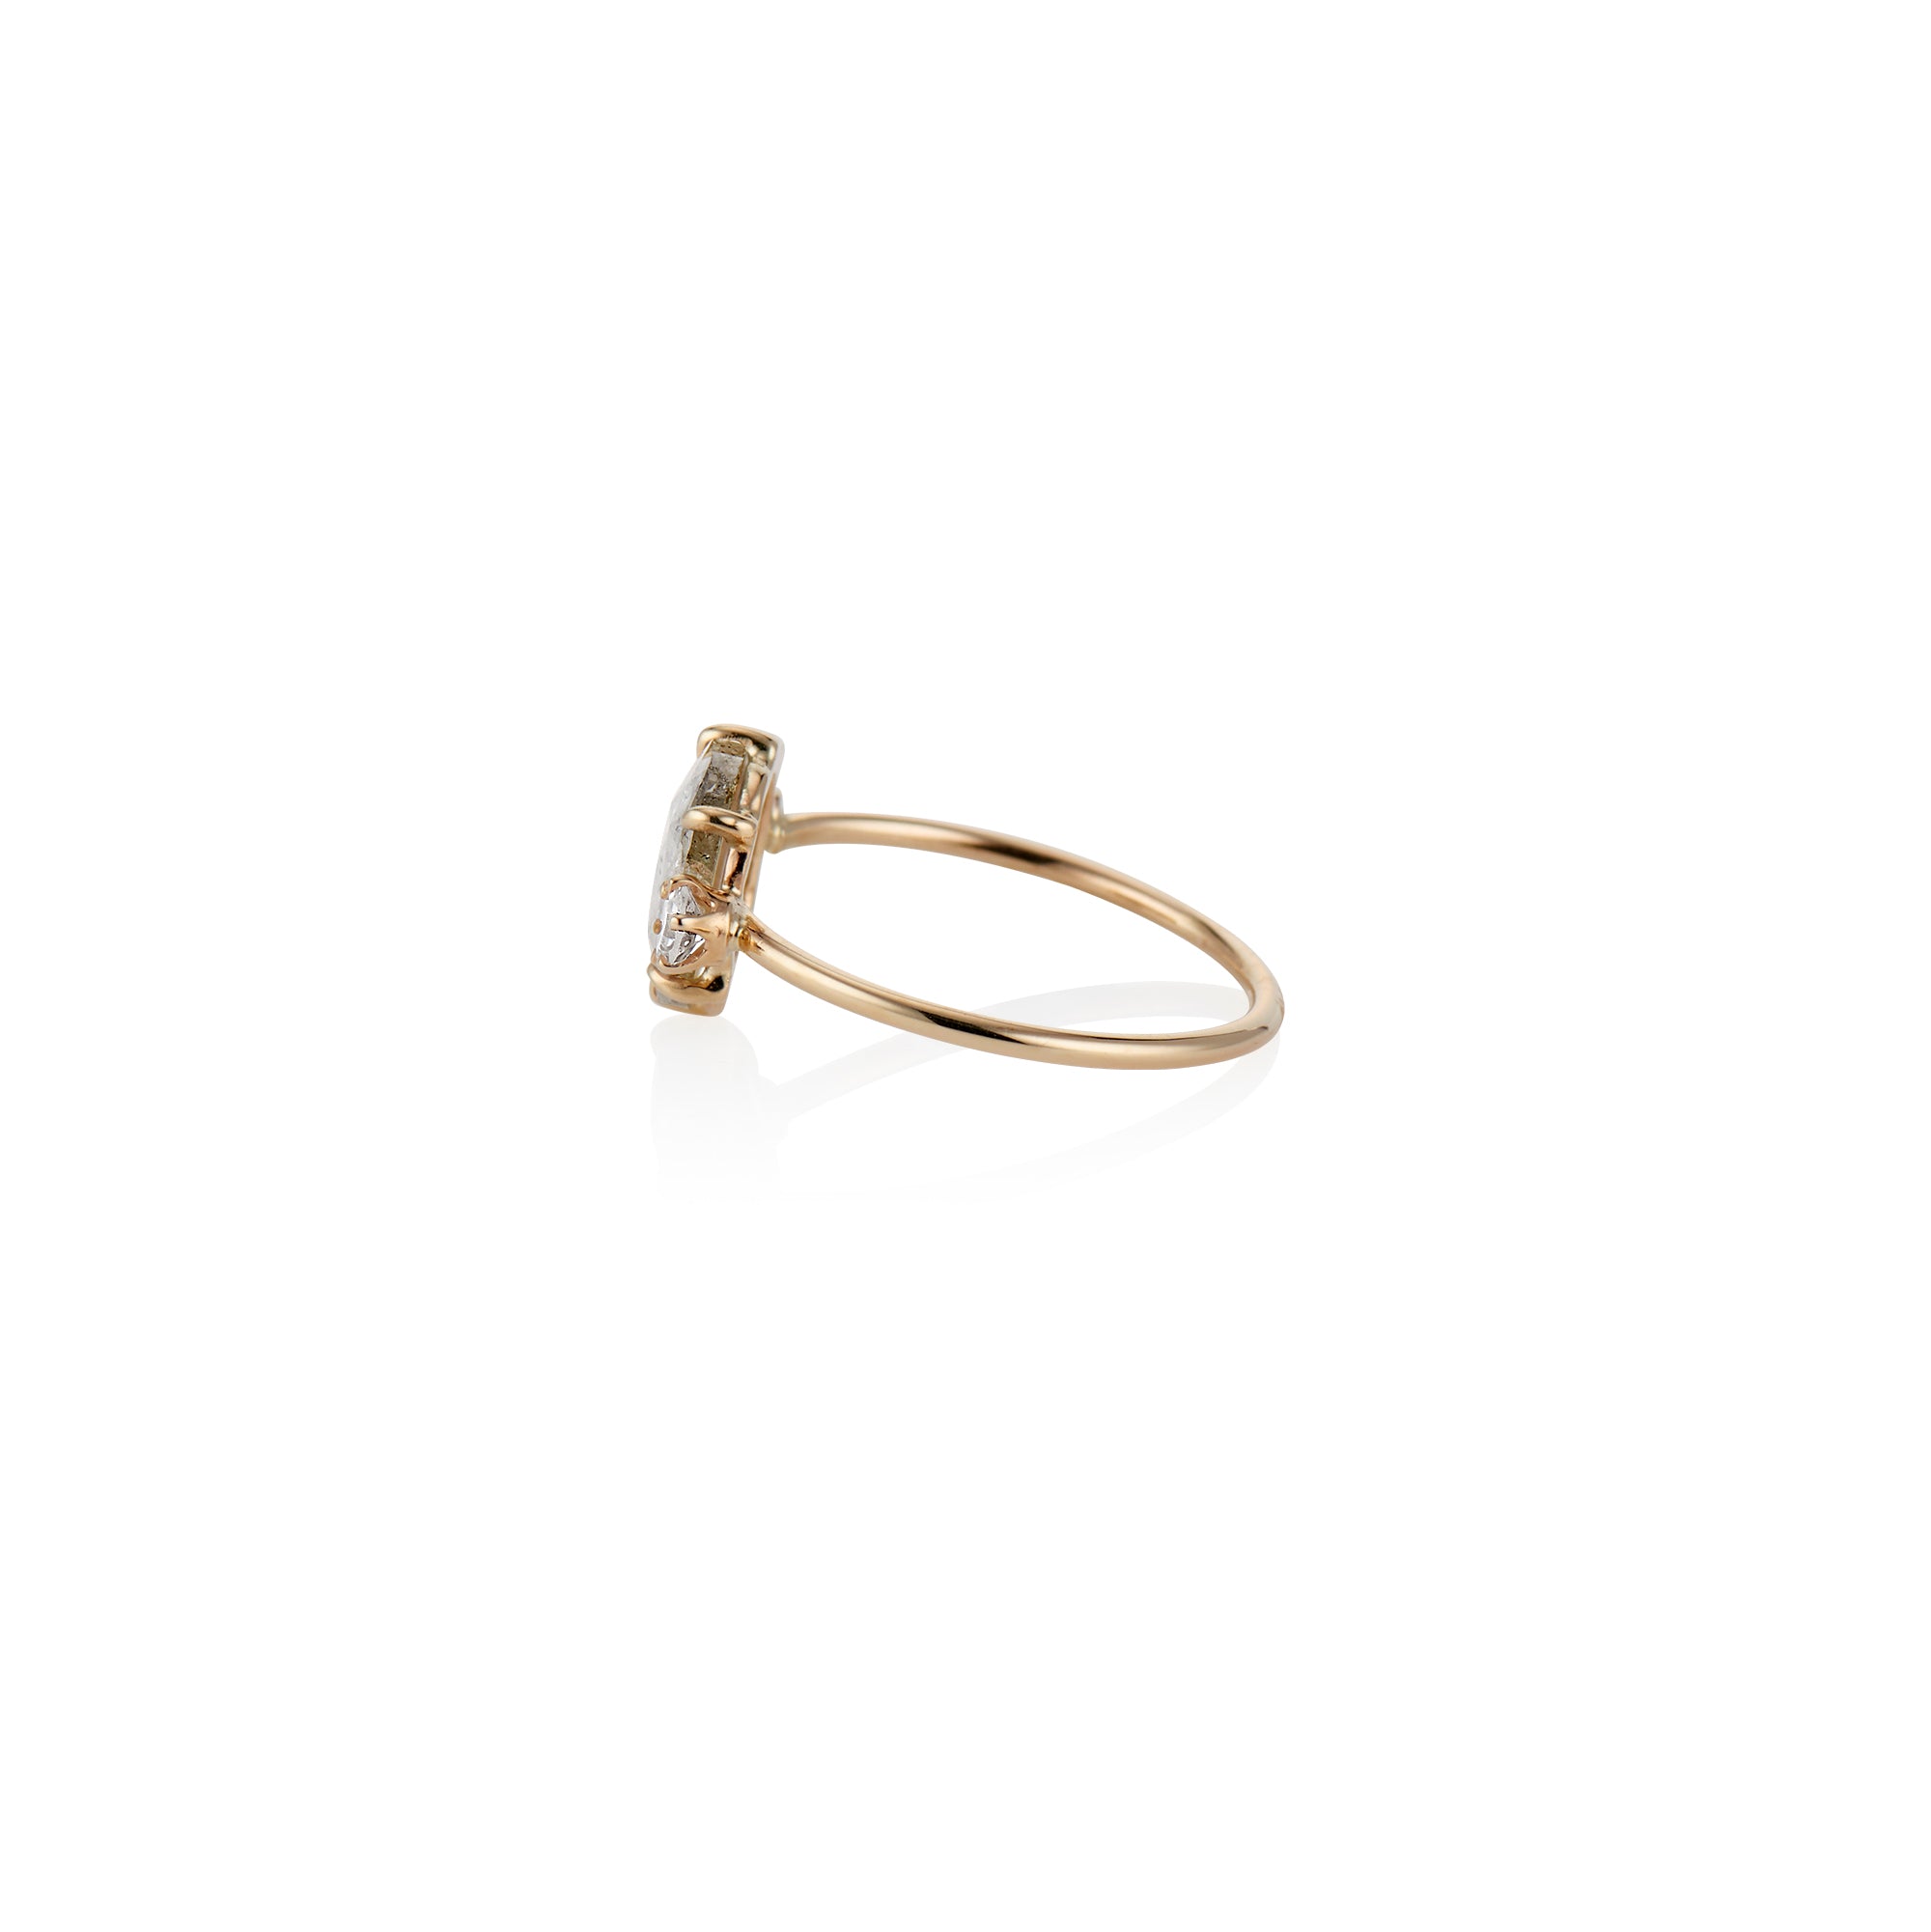 Clair de lune Ring | Charlie and Marcelle